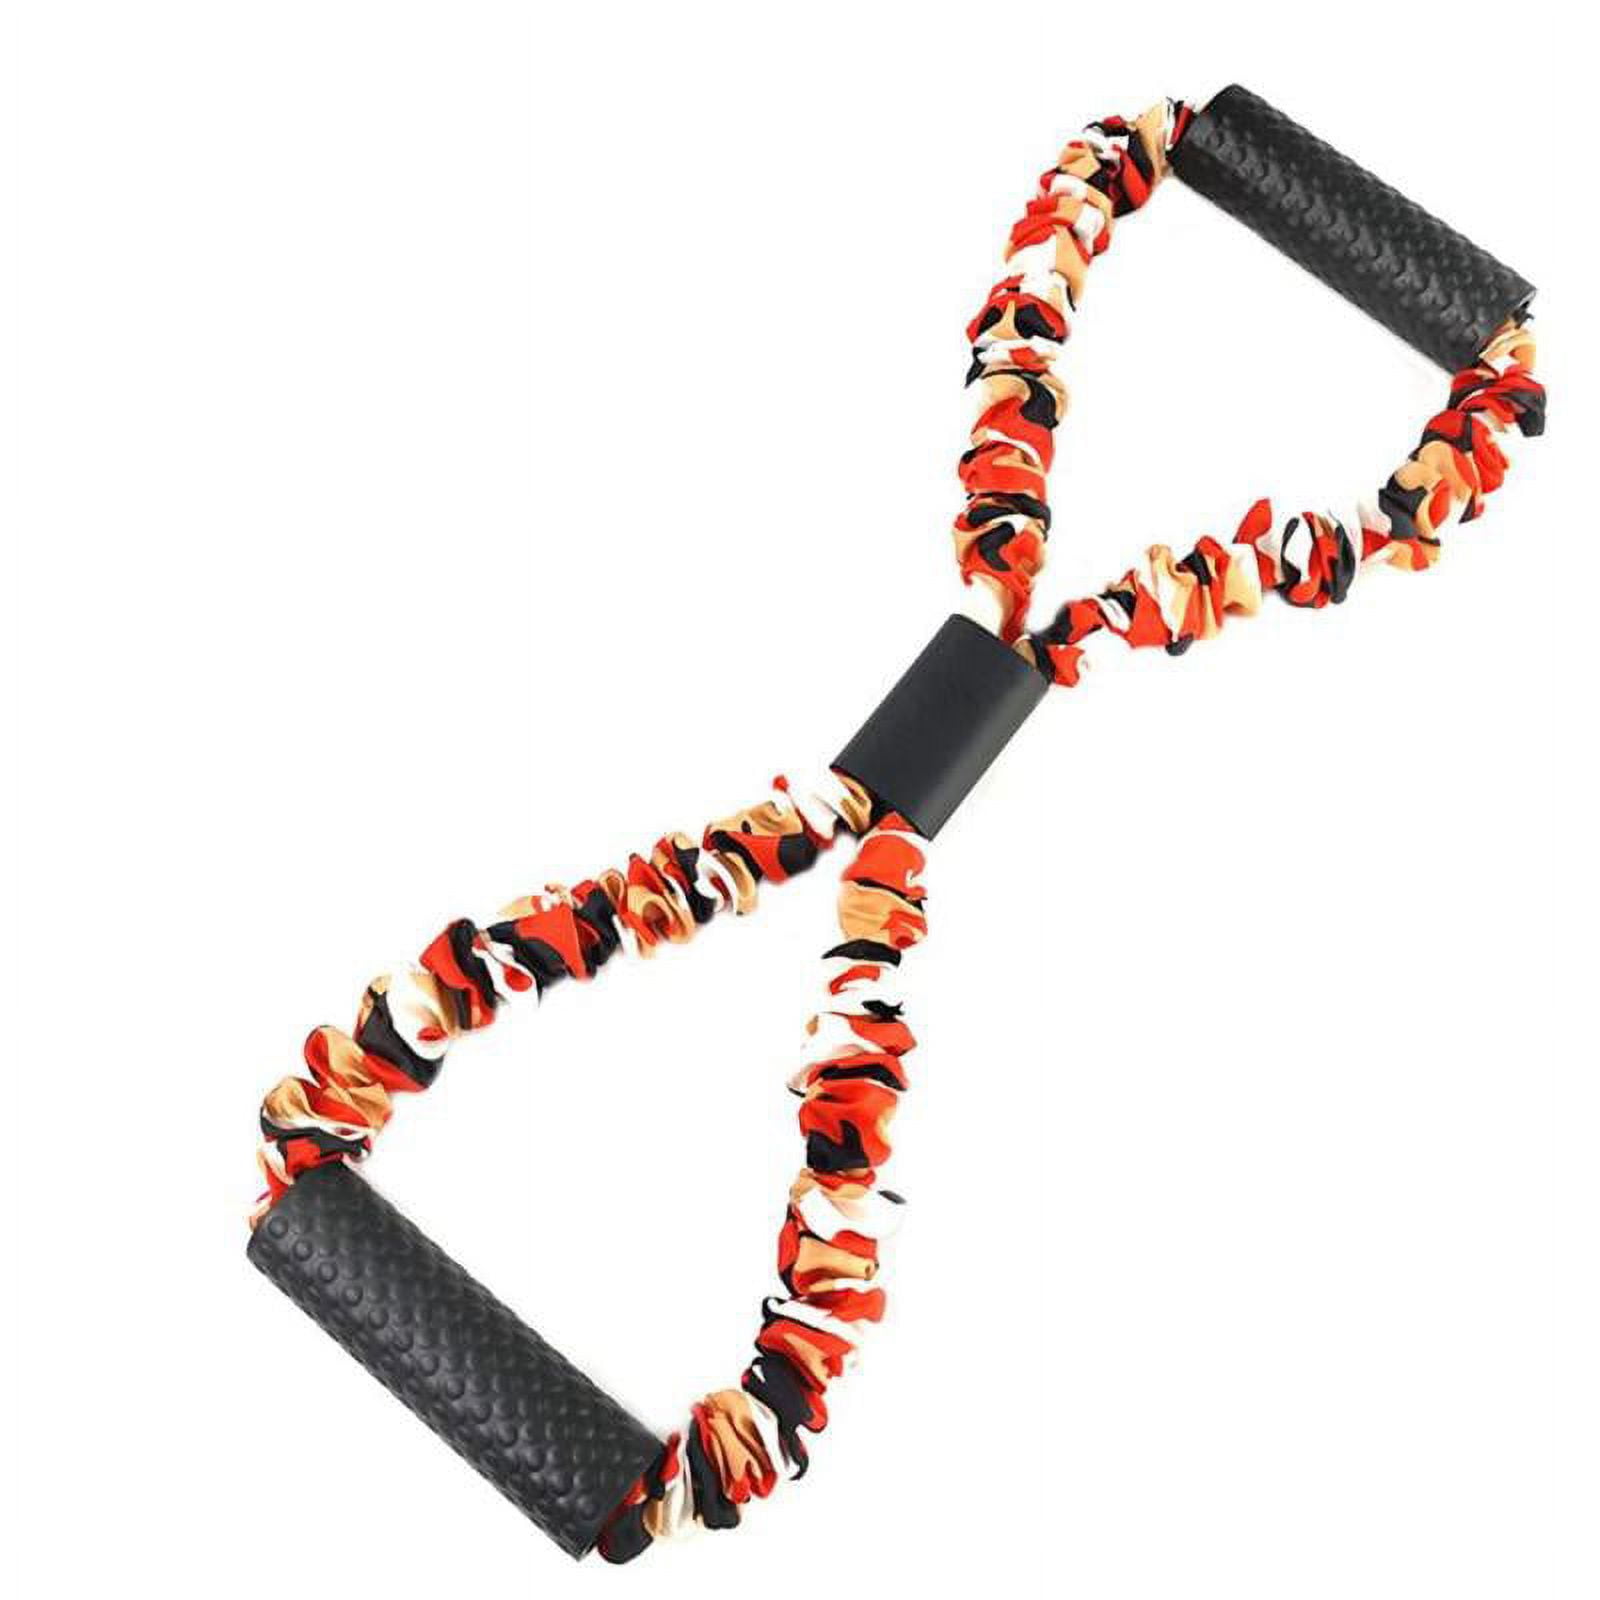 Brebebe Nylon Door Anchor Strap for Resistance Bands Exercises, Multi Point  Anchor Gym Attachment 